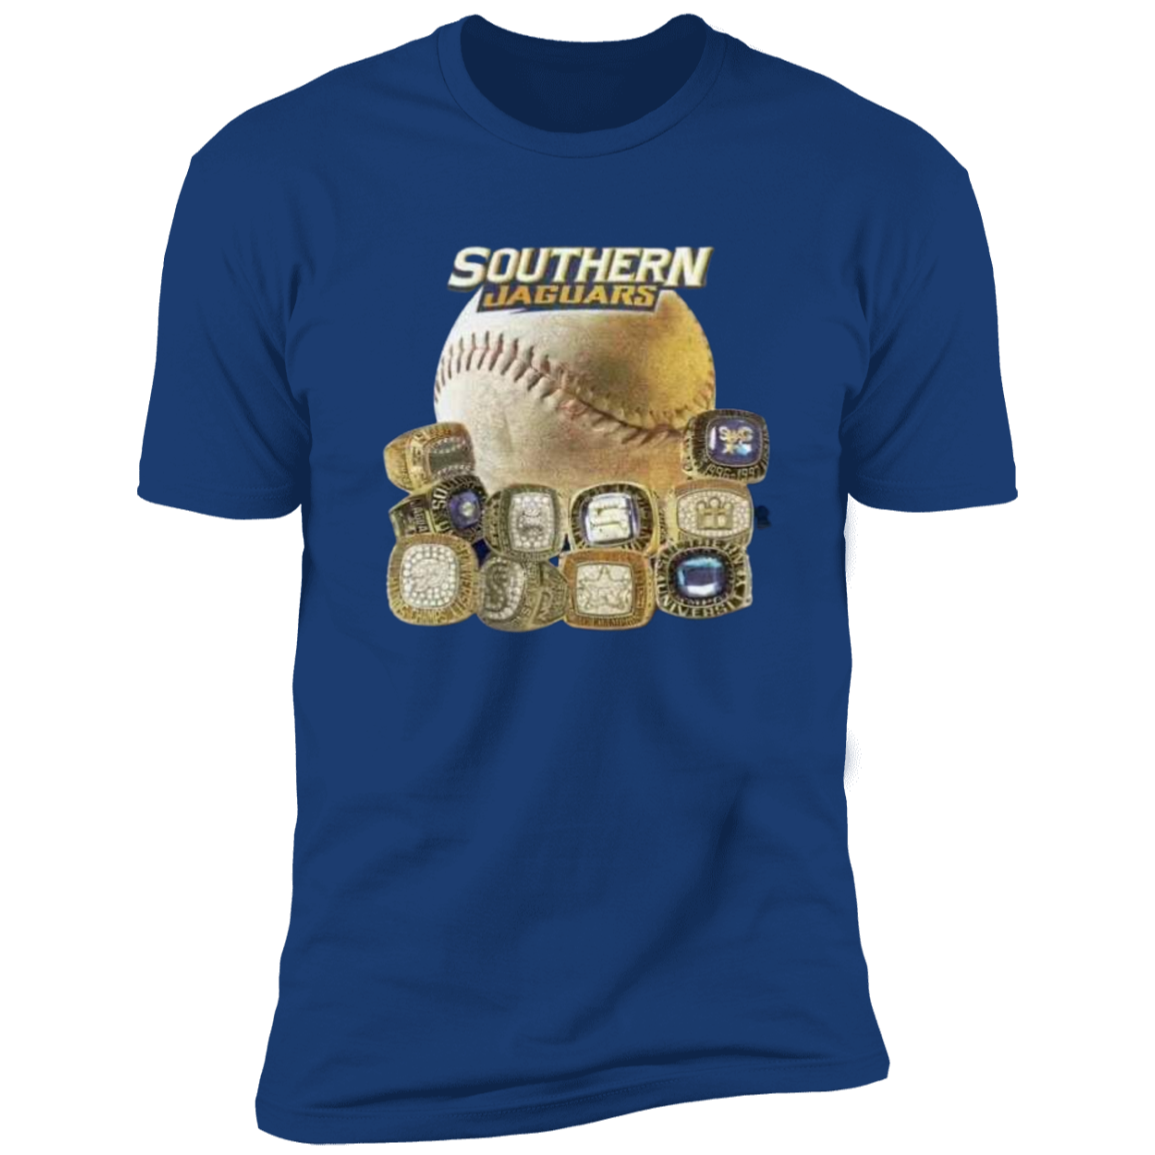 SU Baseball SWAC (Southern Wins Another Championship)  Rings  Z61x Premium Short Sleeve Tee (Closeout)